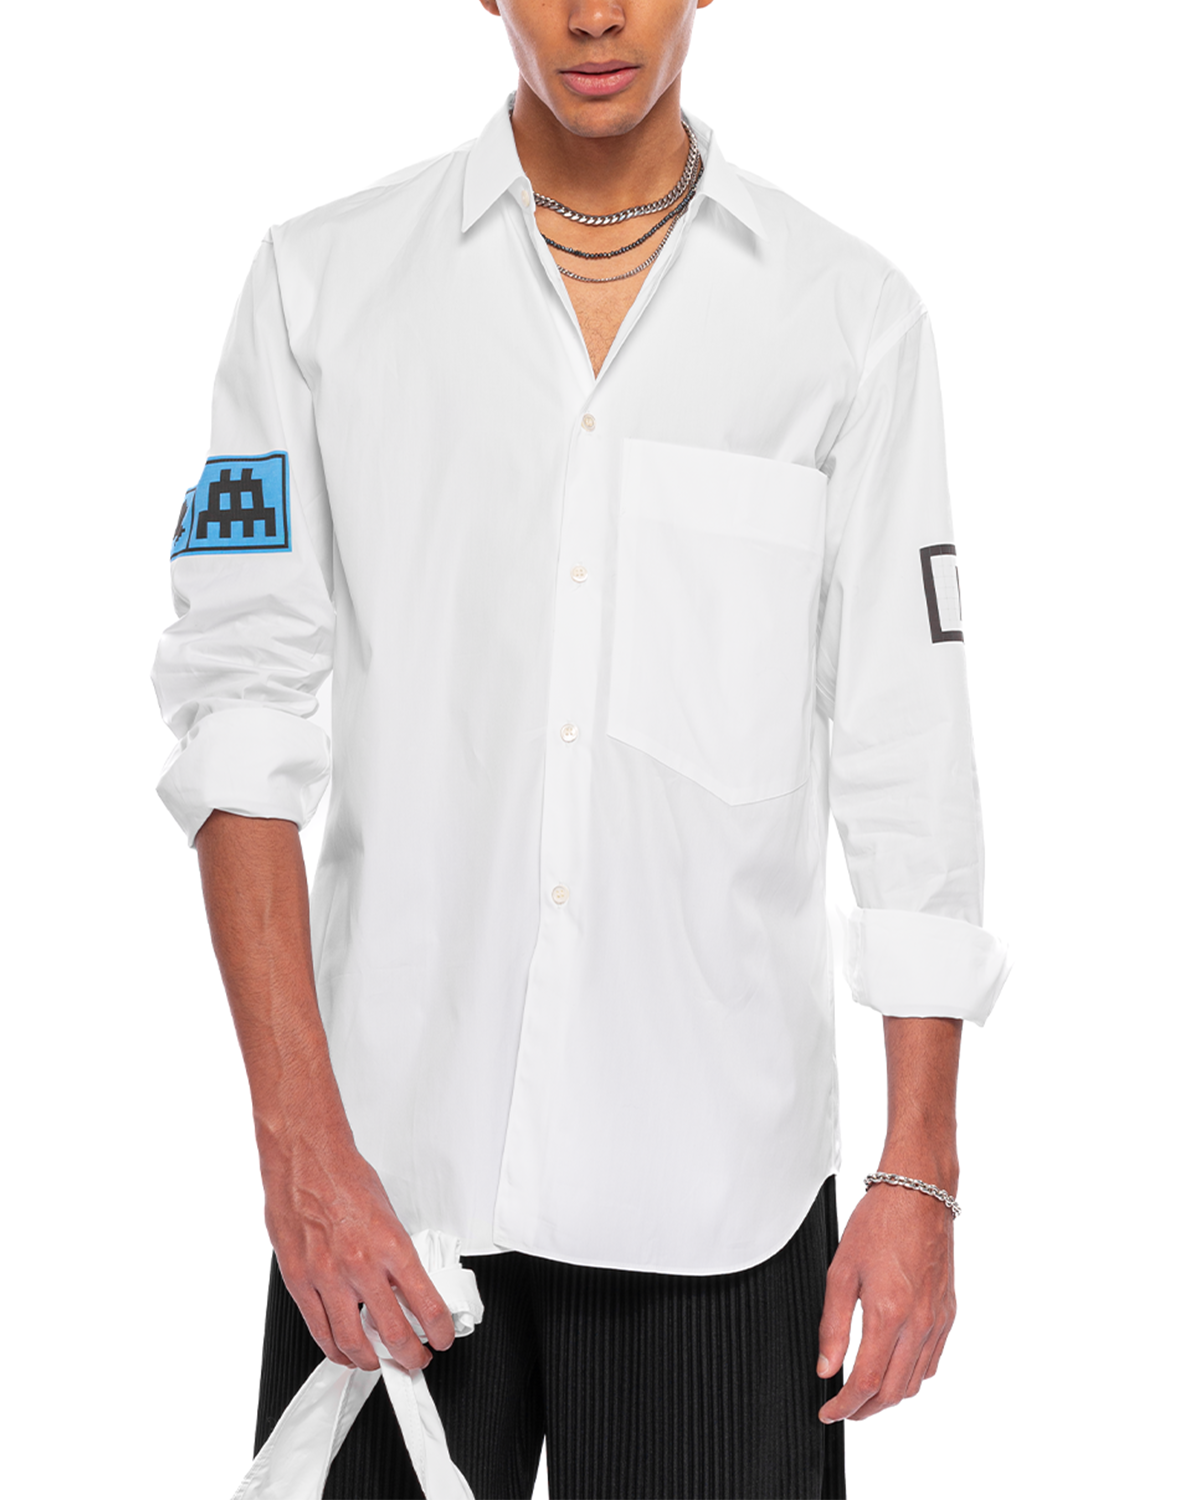 Space Invader Cotton Shirt White